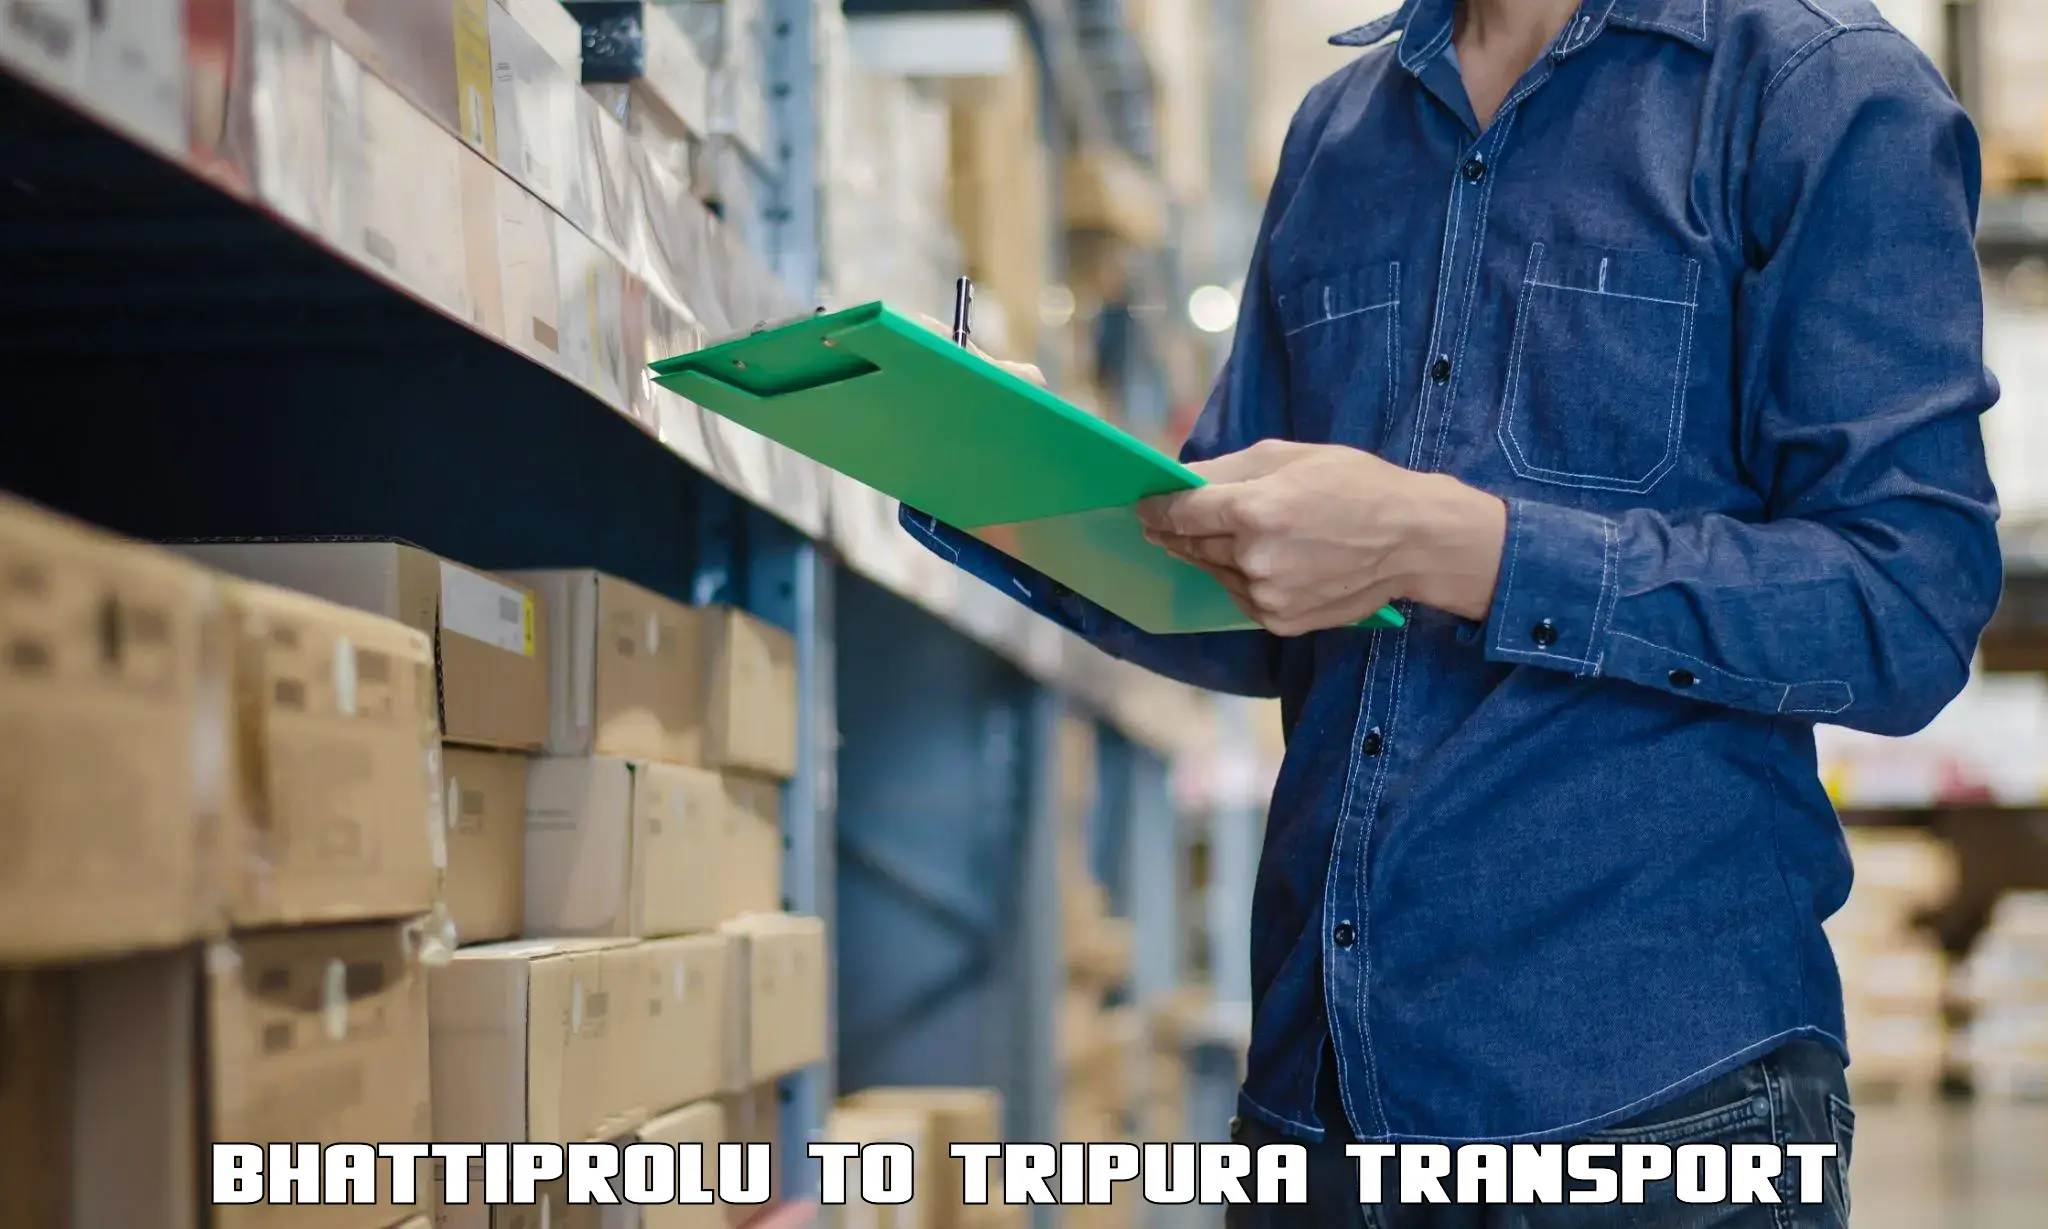 Container transport service Bhattiprolu to Udaipur Tripura